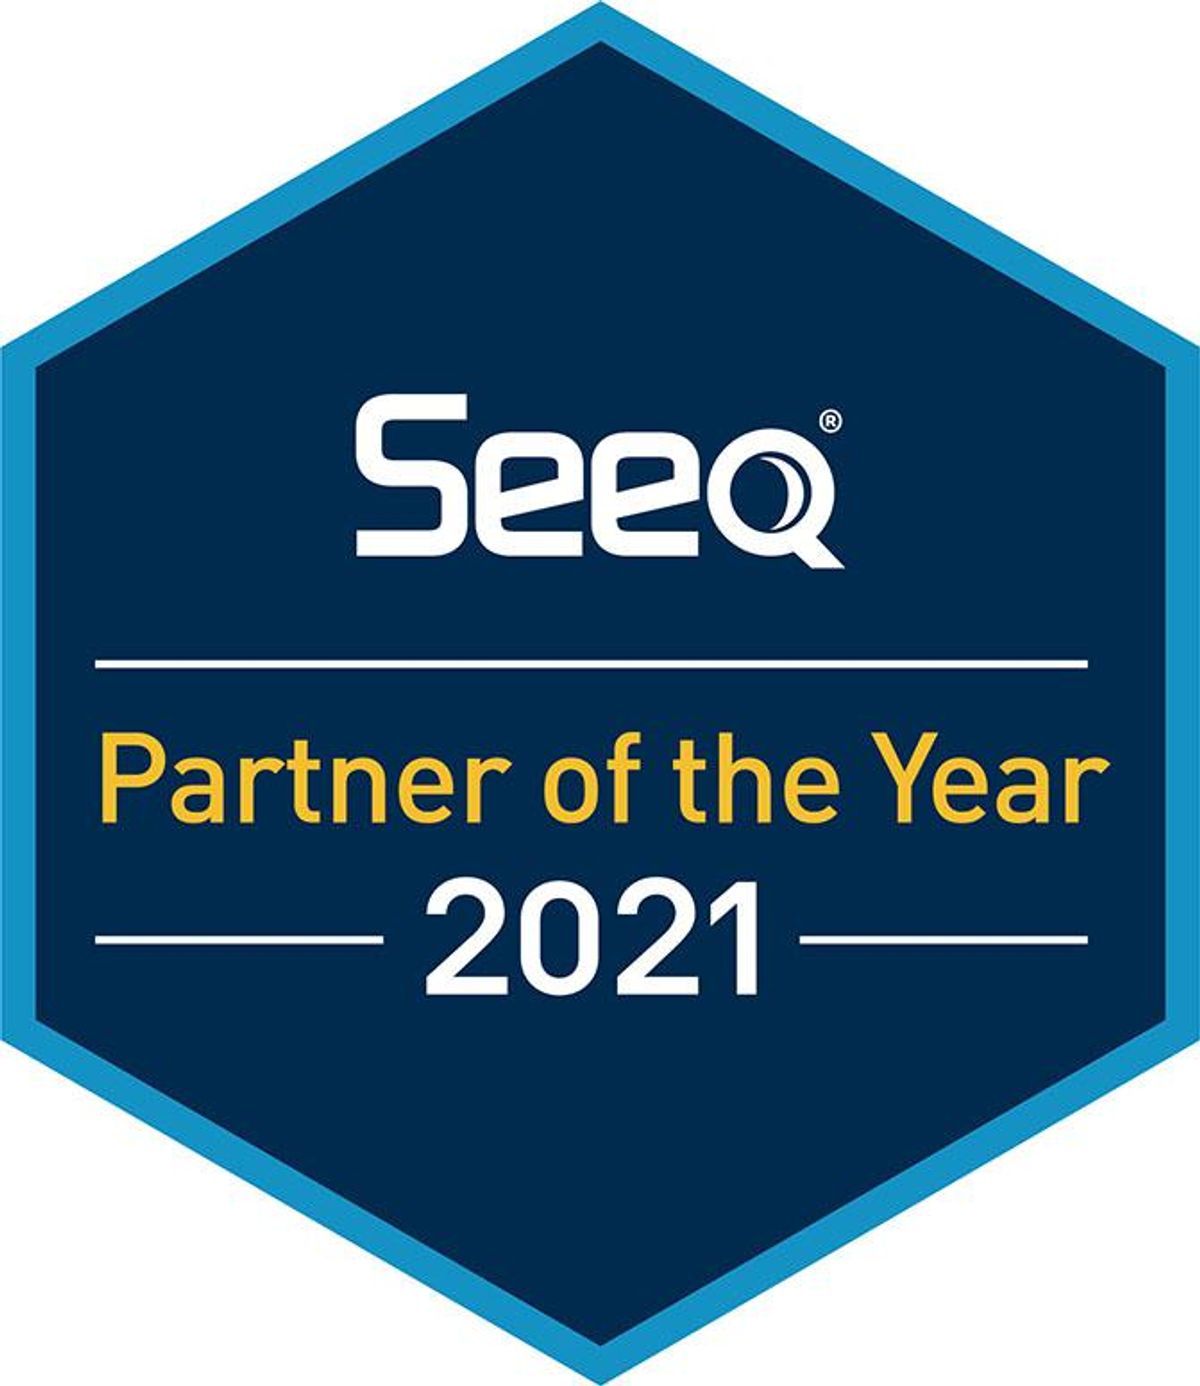 Seeq Recognizes Reseller and Service Partners of the Year